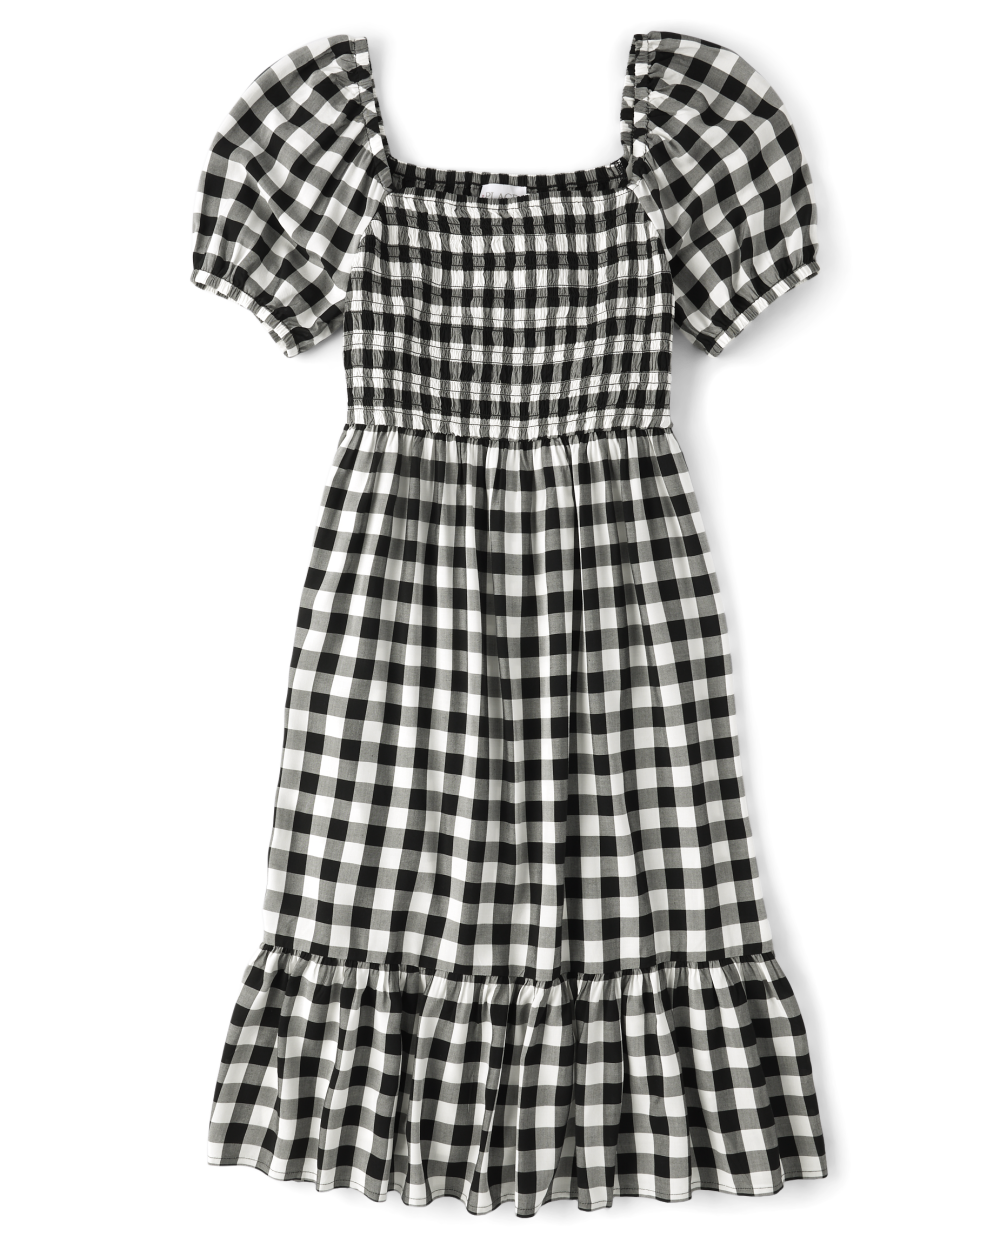 Above the Knee Rayon Puff Sleeves Short Sleeves Sleeves Smocked Square Neck Checkered Gingham Print Dress With Ruffles